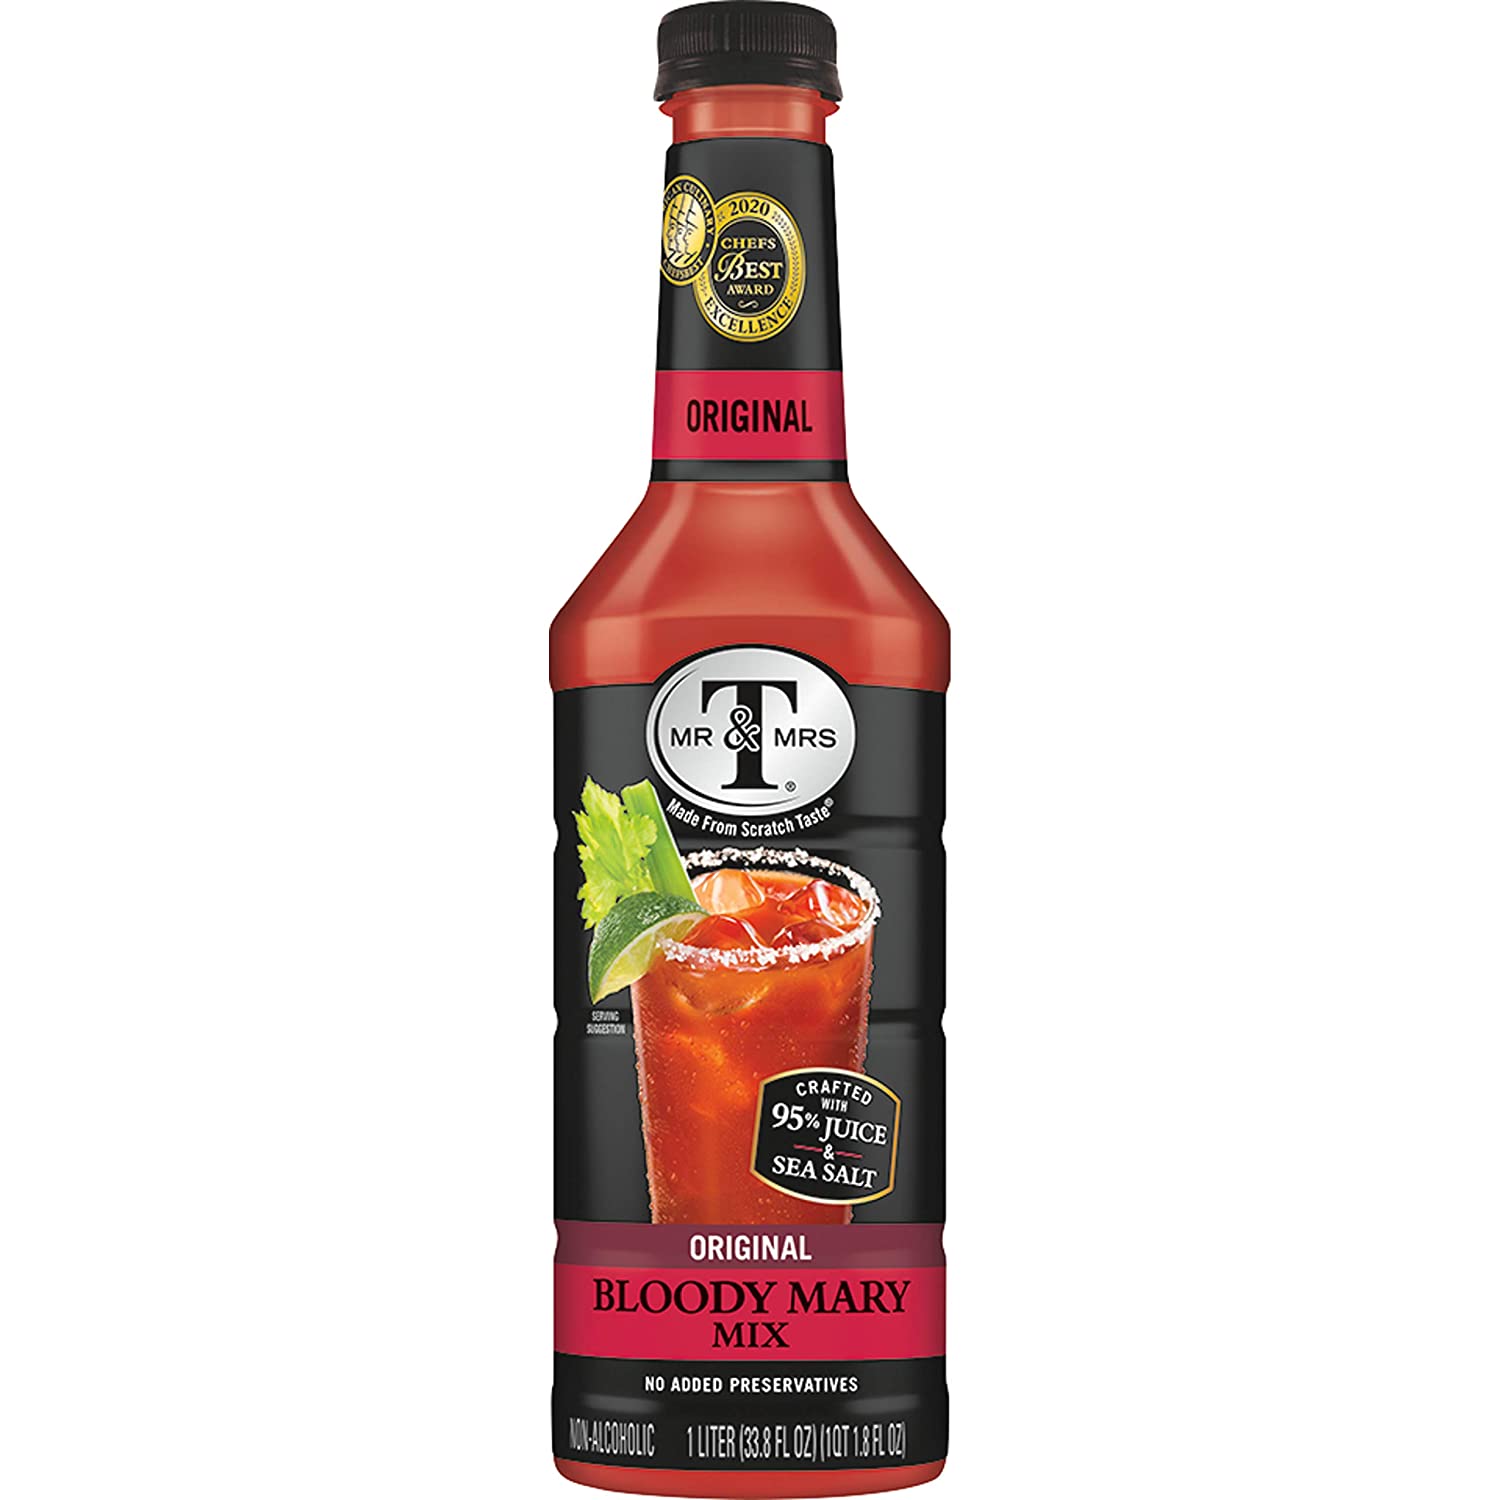 images/wine/SPIRITAS and OTHERS/Mr & Mrs T Original Bloody Mary Mix.jpg